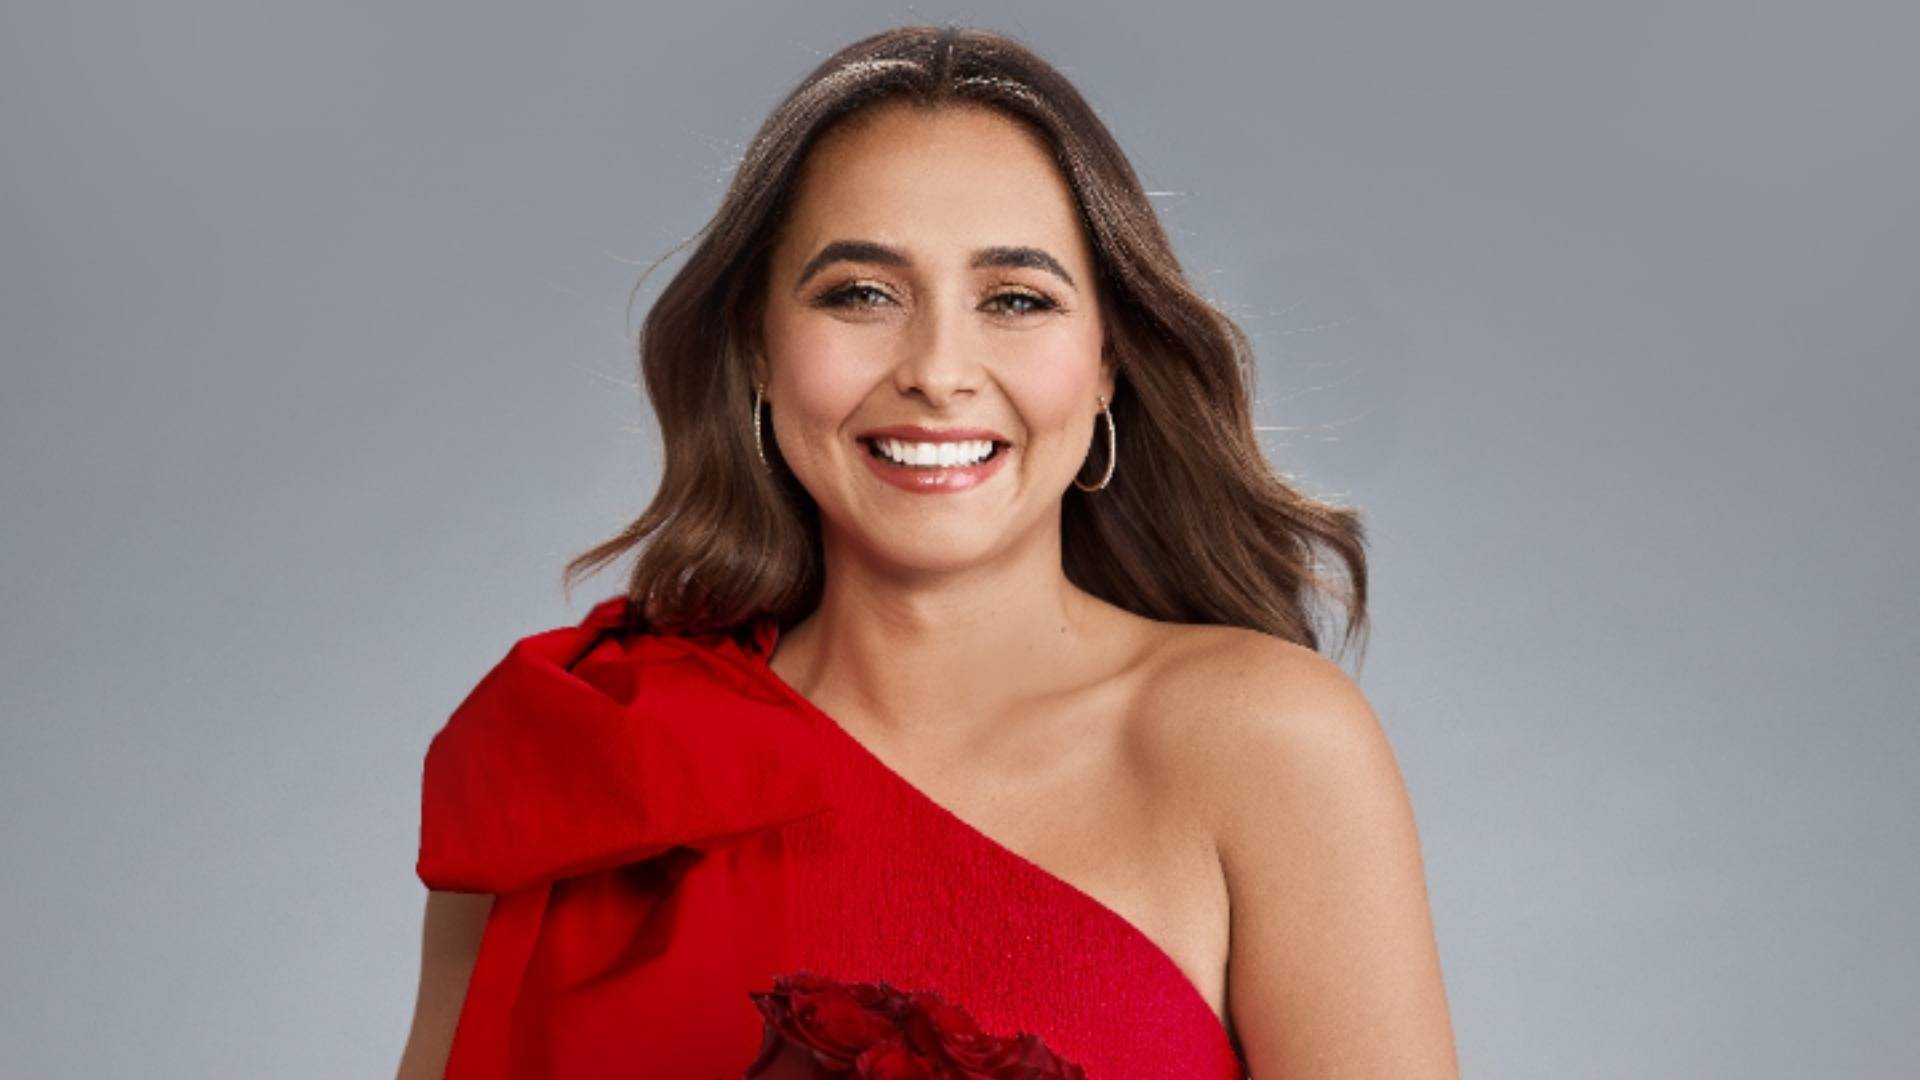 Brooke Blurton smiling in a red dress in front of a grey background